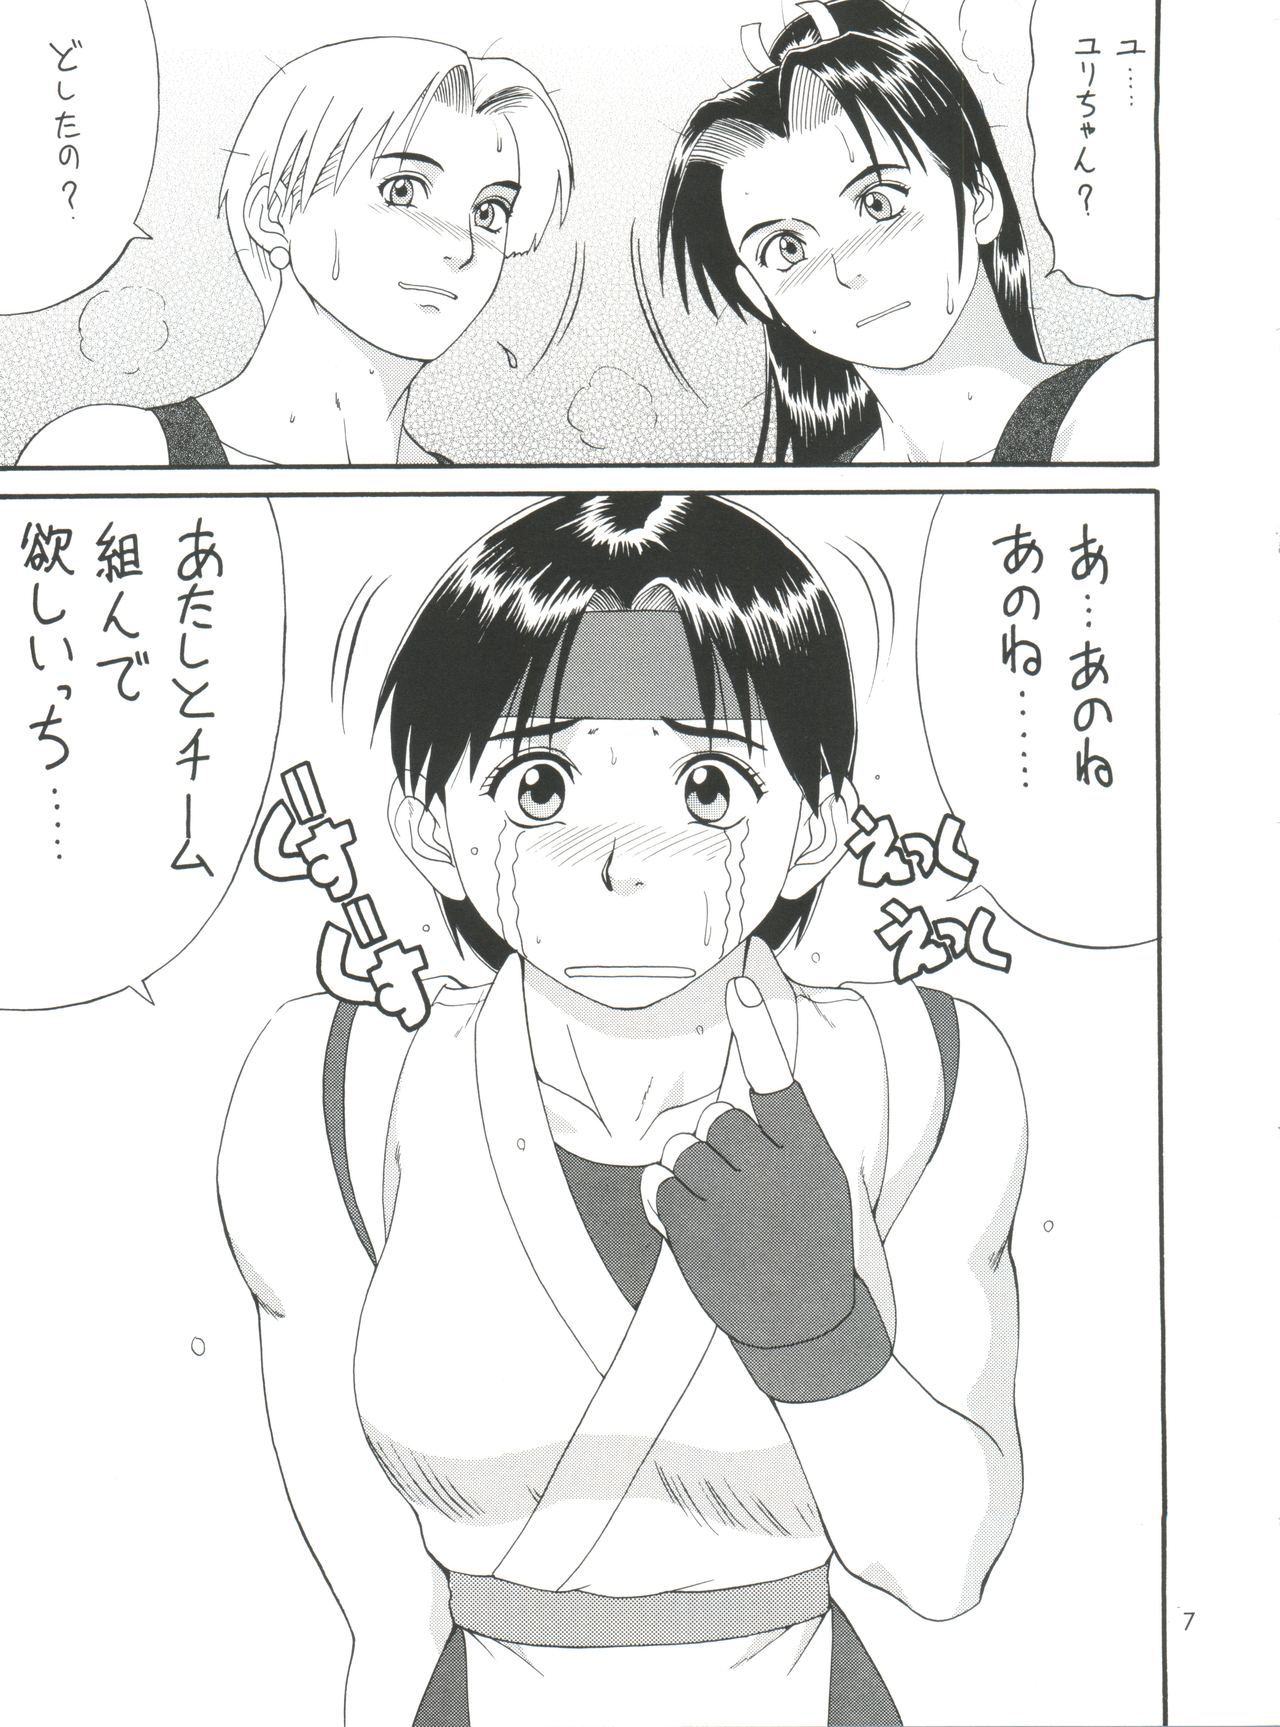 (CR24) [Saigado (Ishoku Dougen)] The Yuri & Friends '98 (King of Fighters) page 6 full